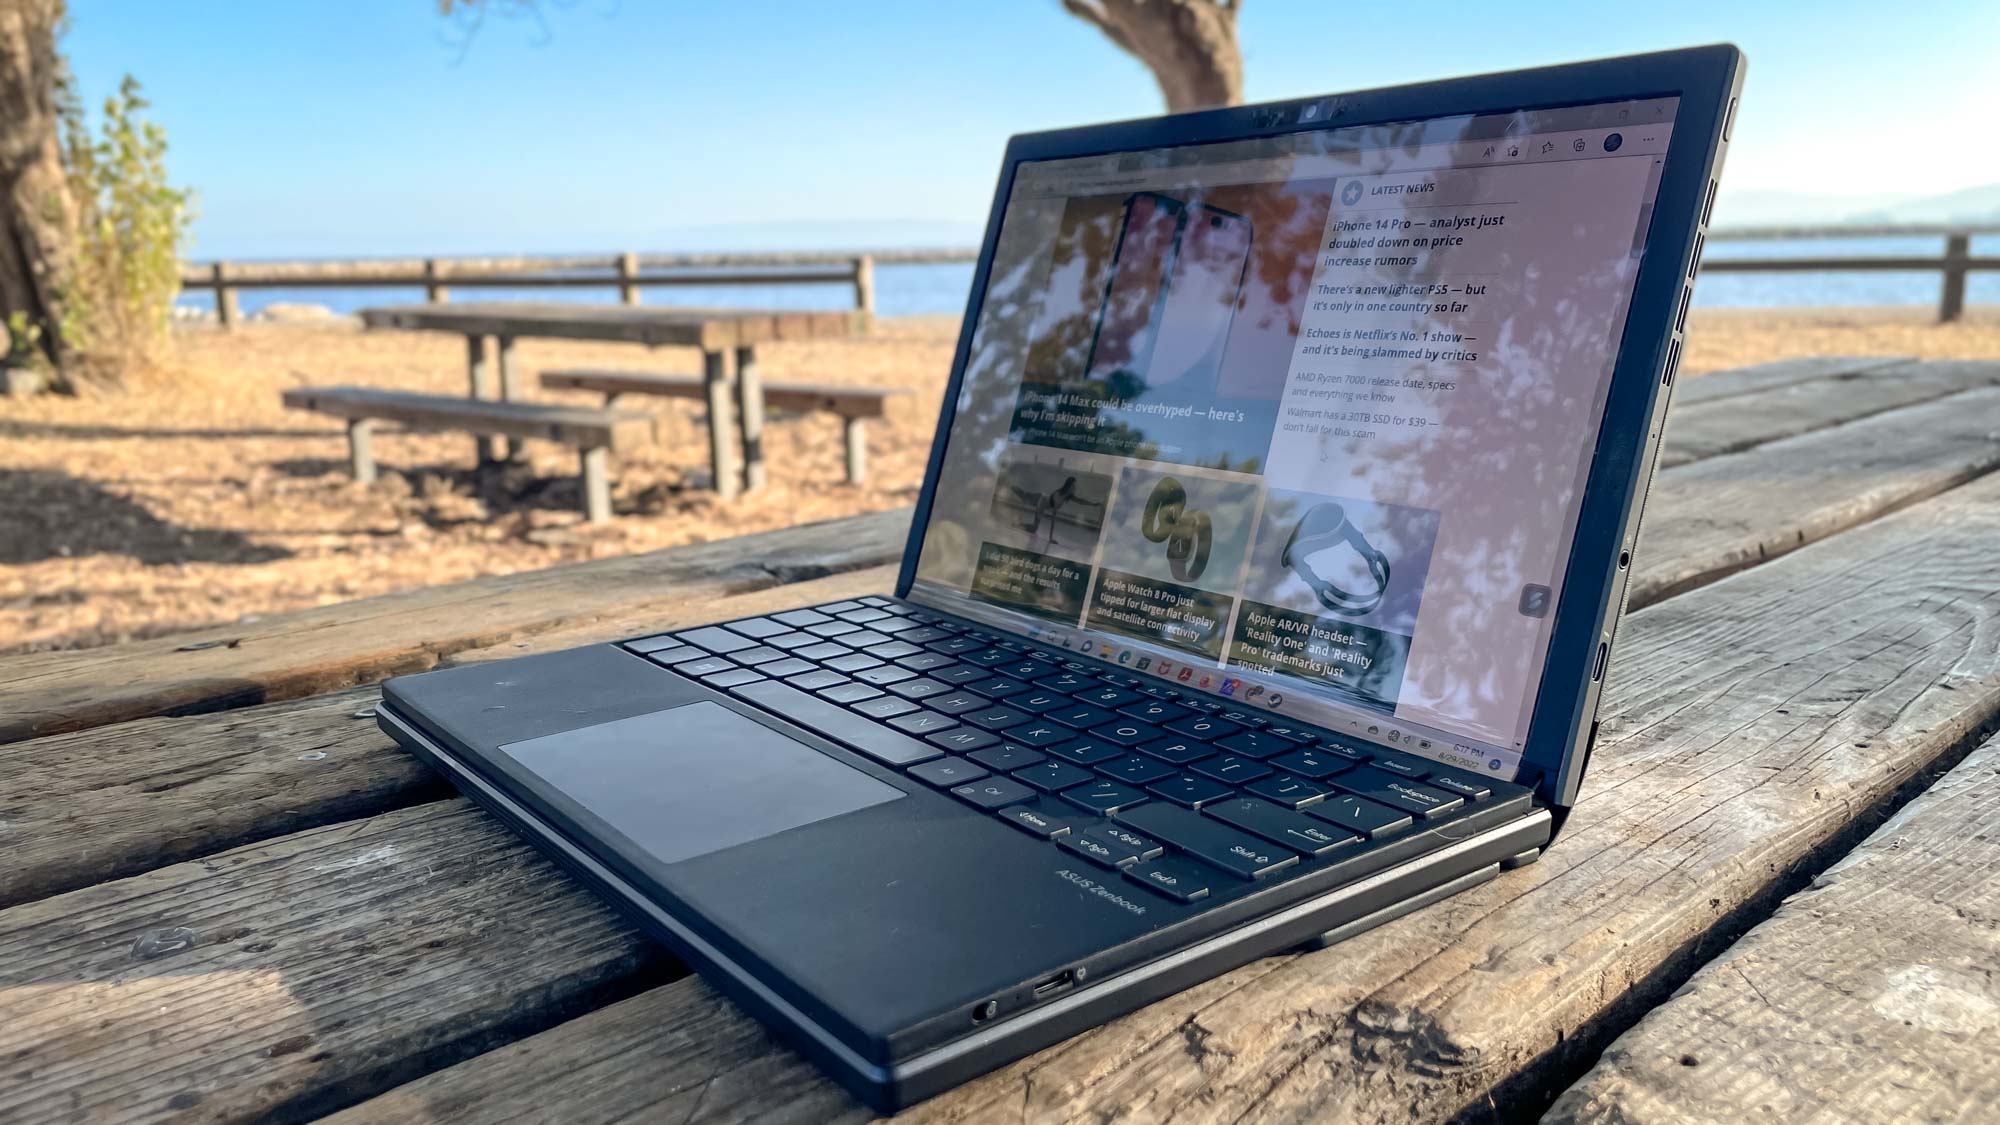 Asus Zenbook 17 Fold OLED review unit on picnic table outside